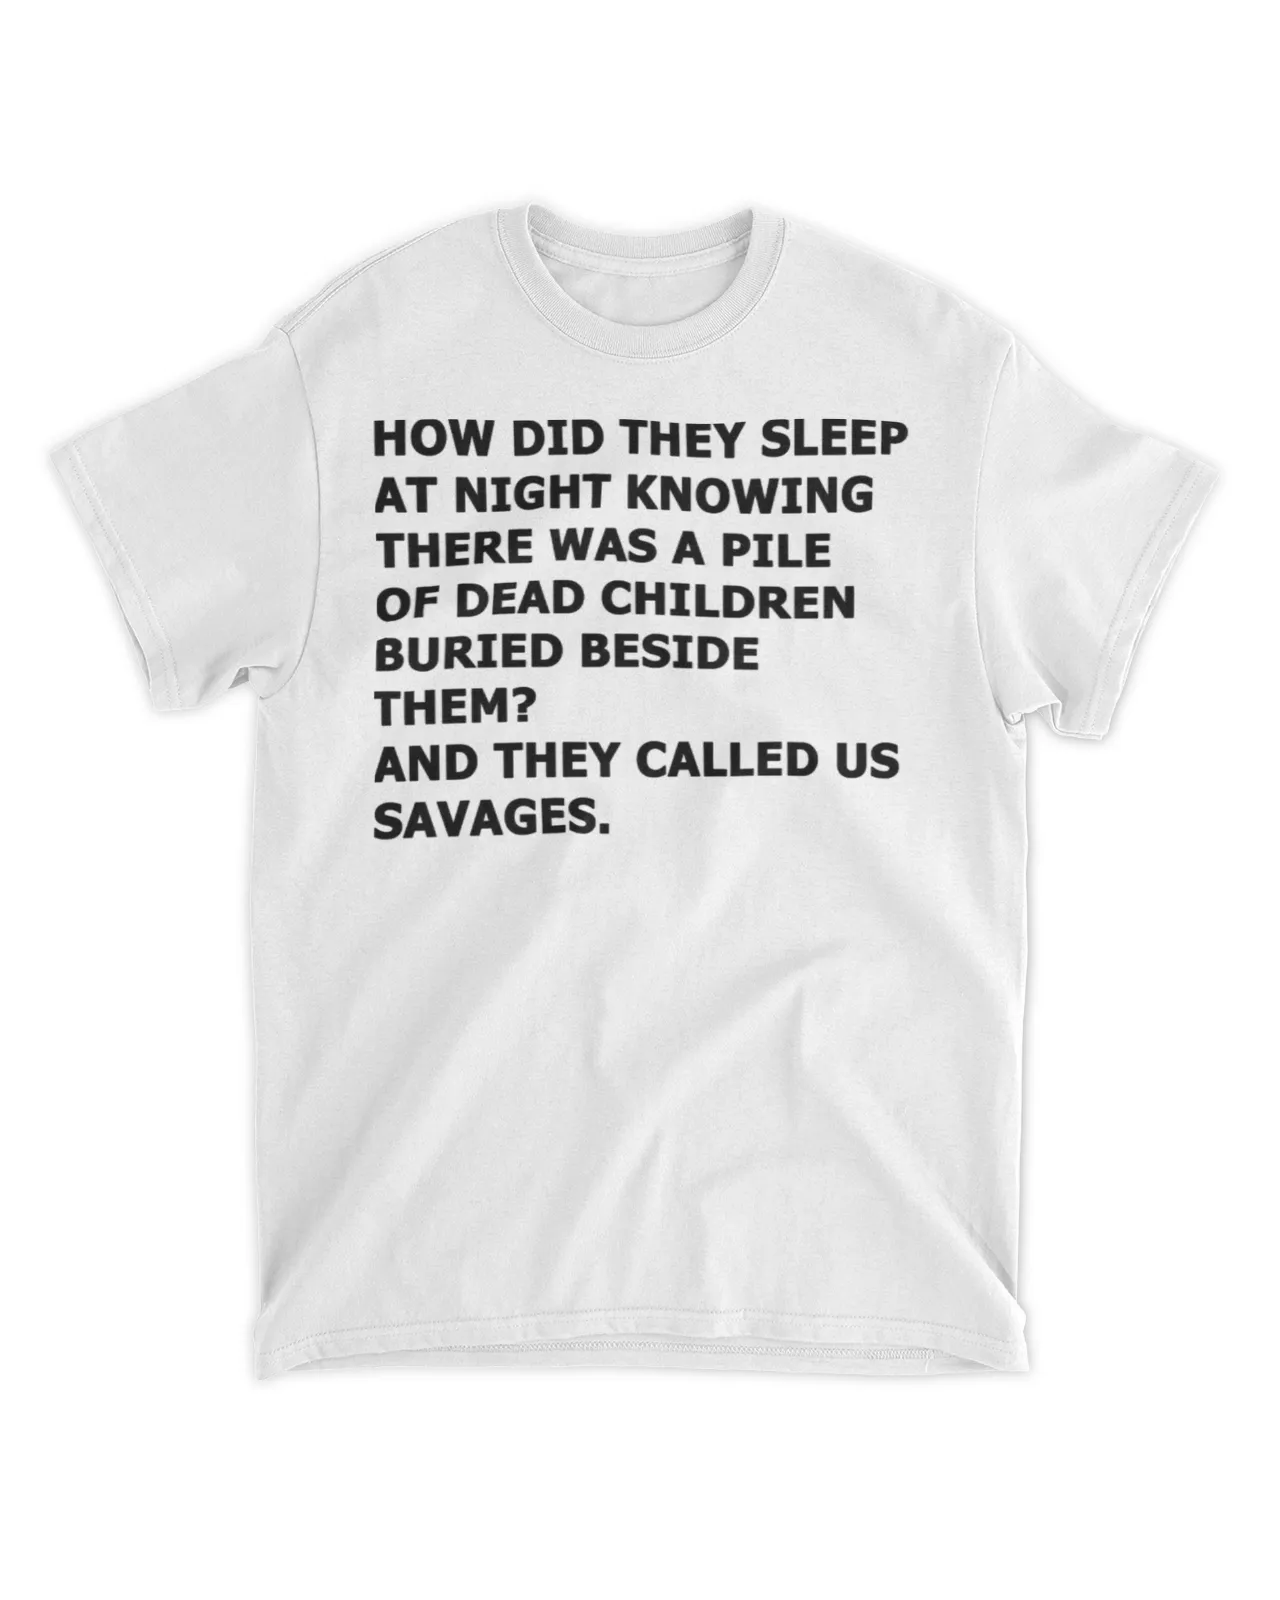  How did they sleep at night knowing there was a pile of dead children buried beside them and they called us savages shirt